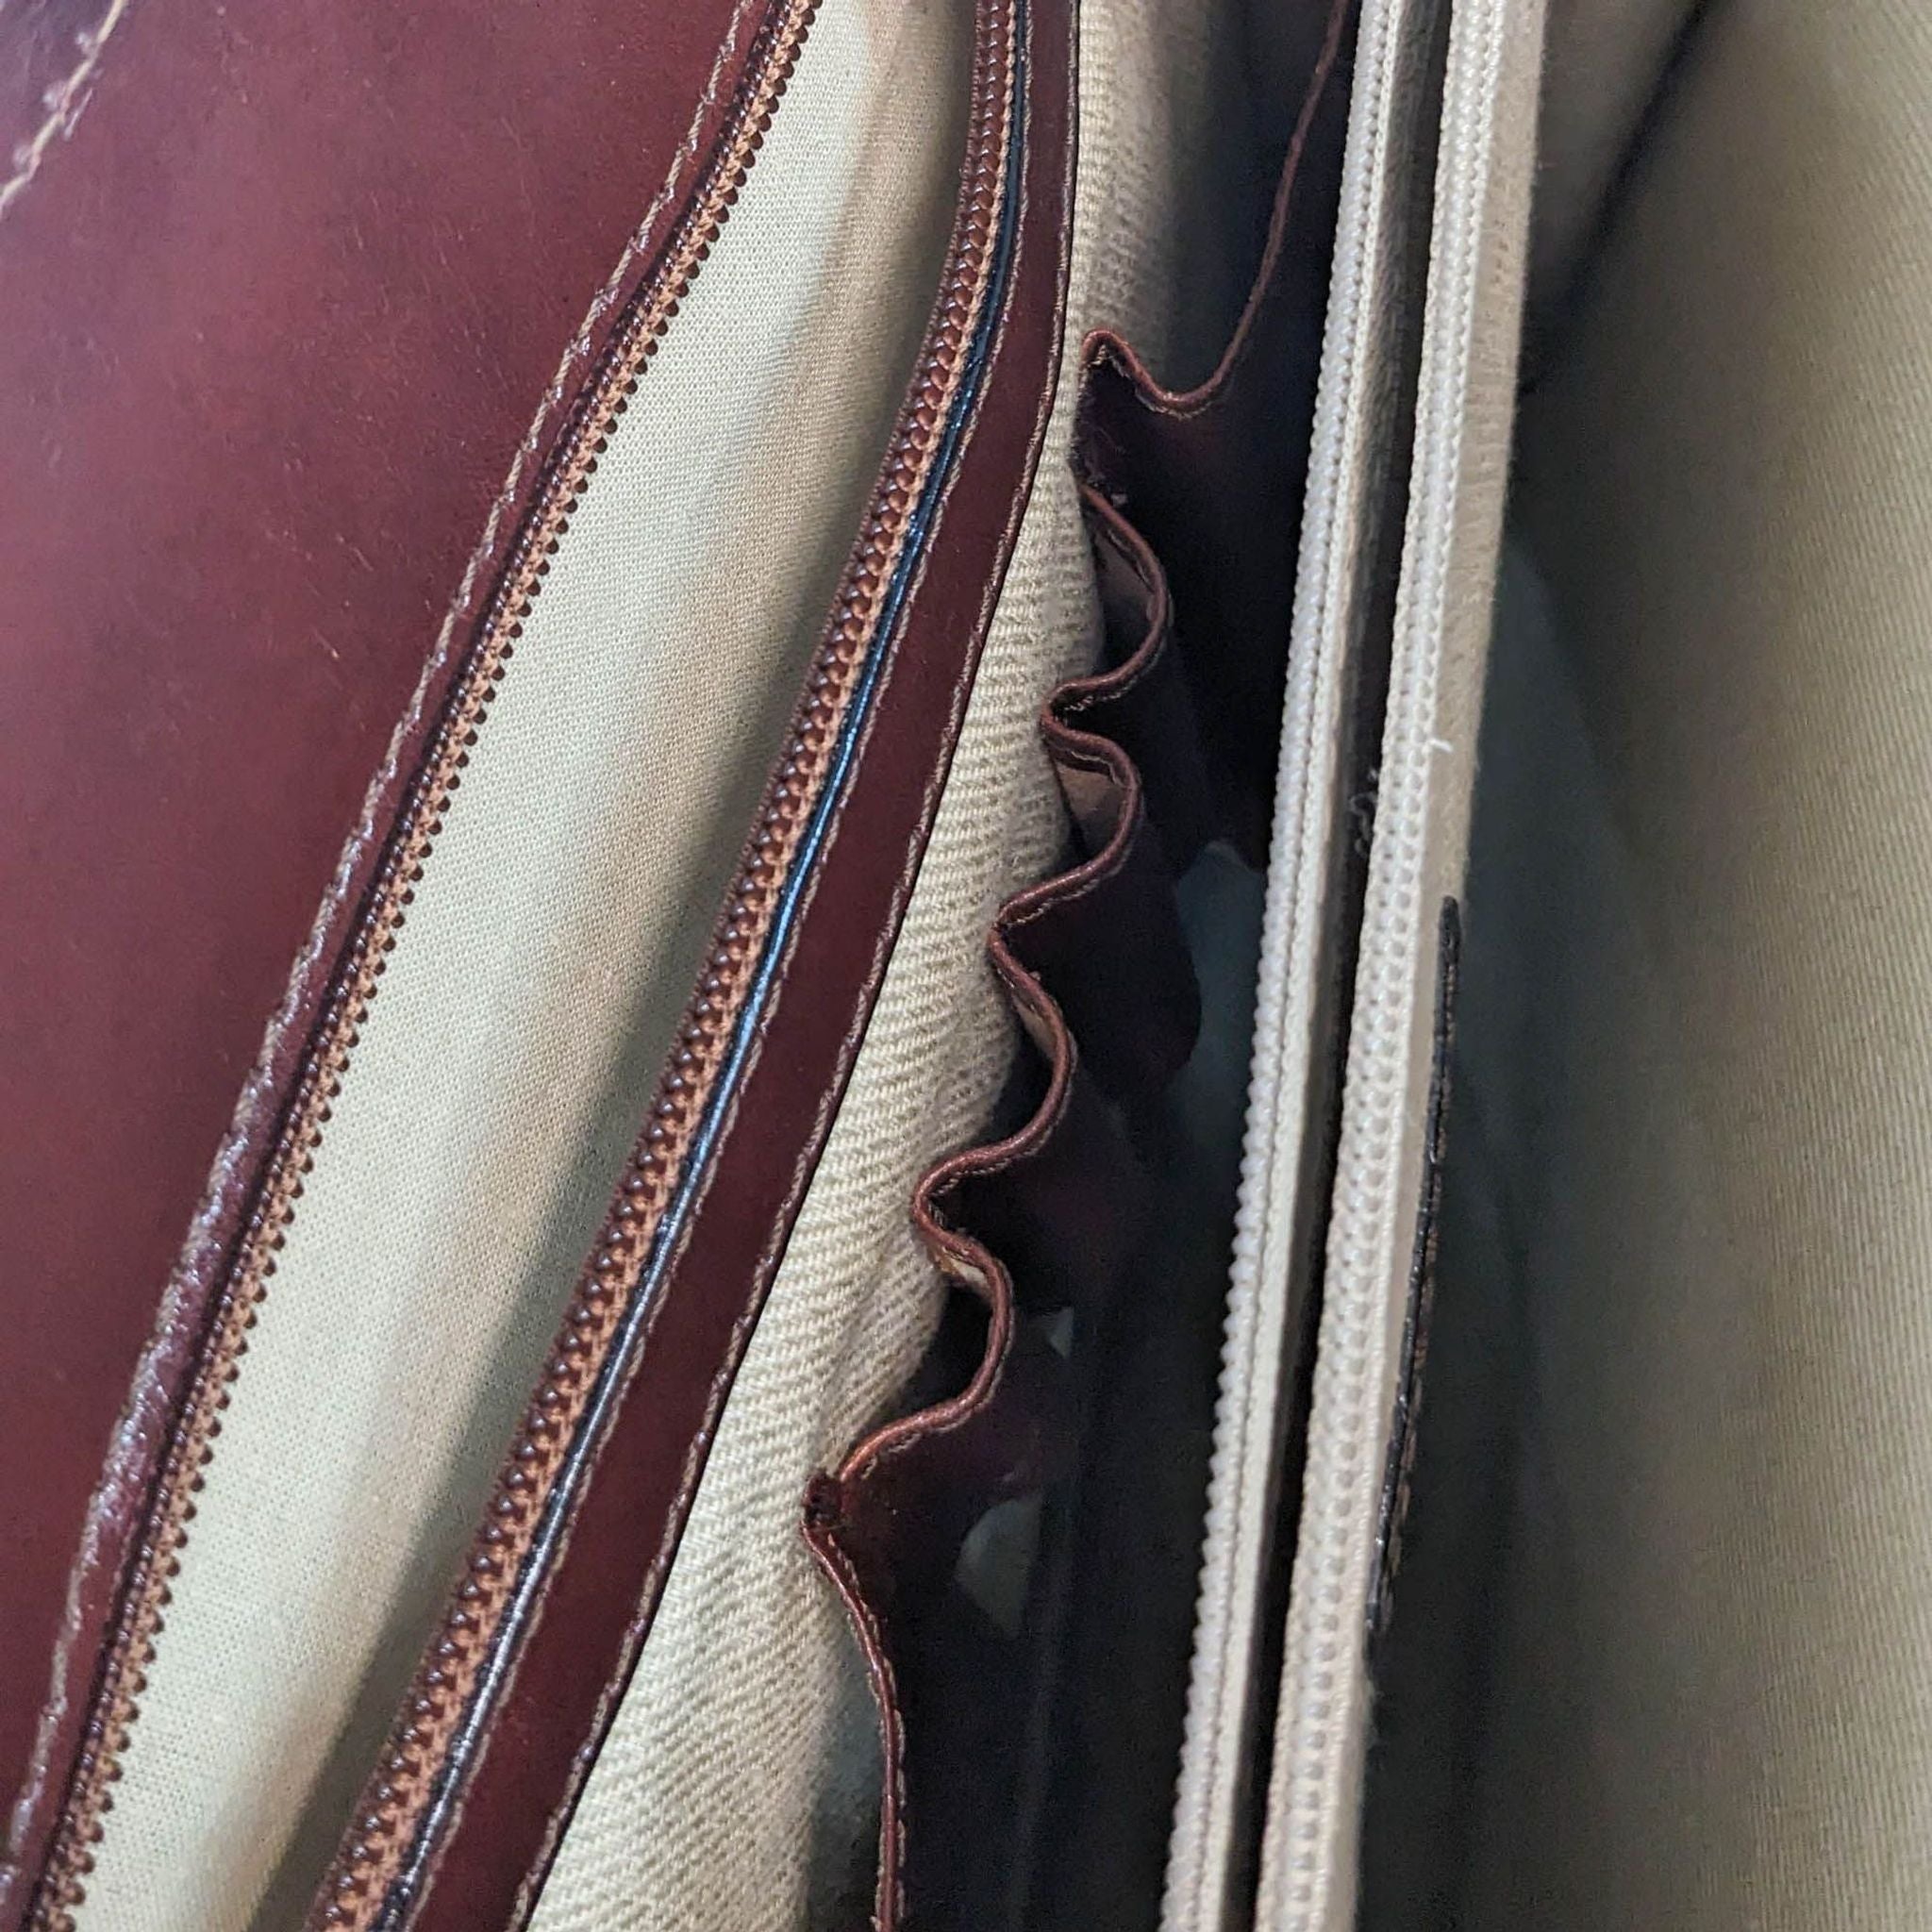 Close-up of an open Bosca leather purse revealing its fabric interior, stitching details, and pocket structure.